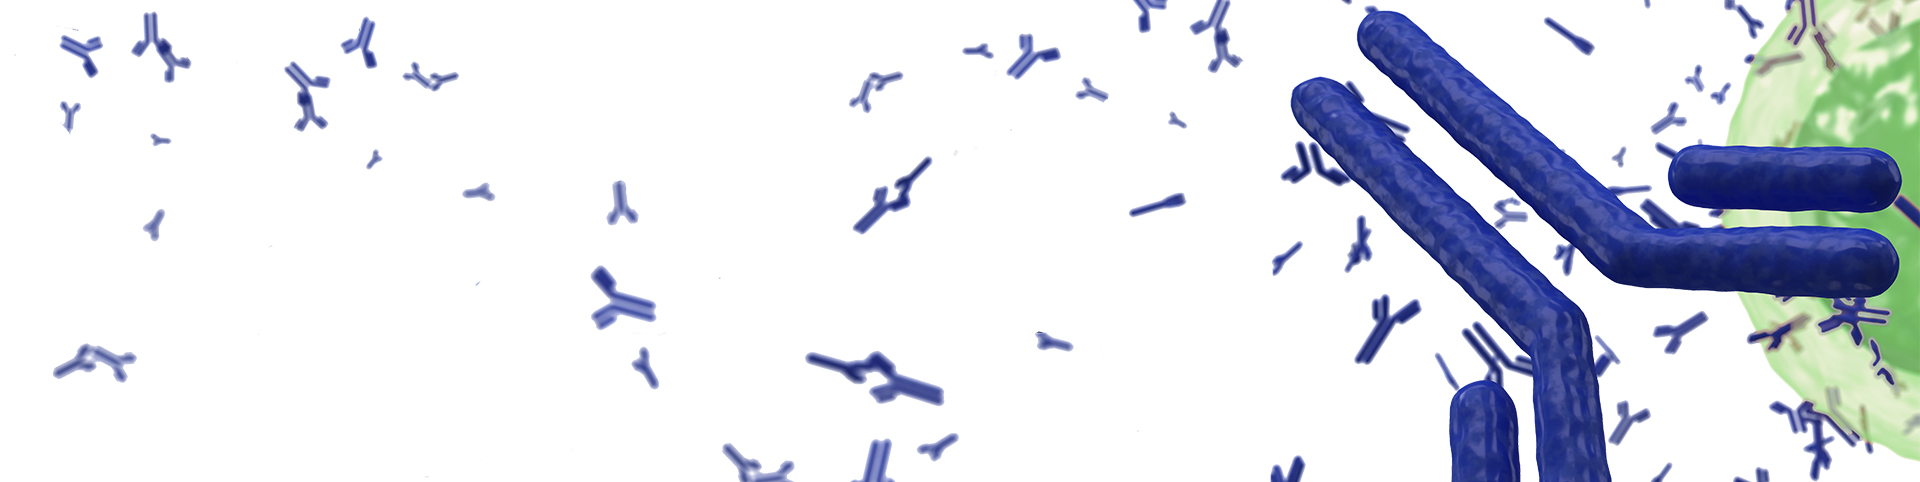 Quality-Assistance-scientific-library-antibodies